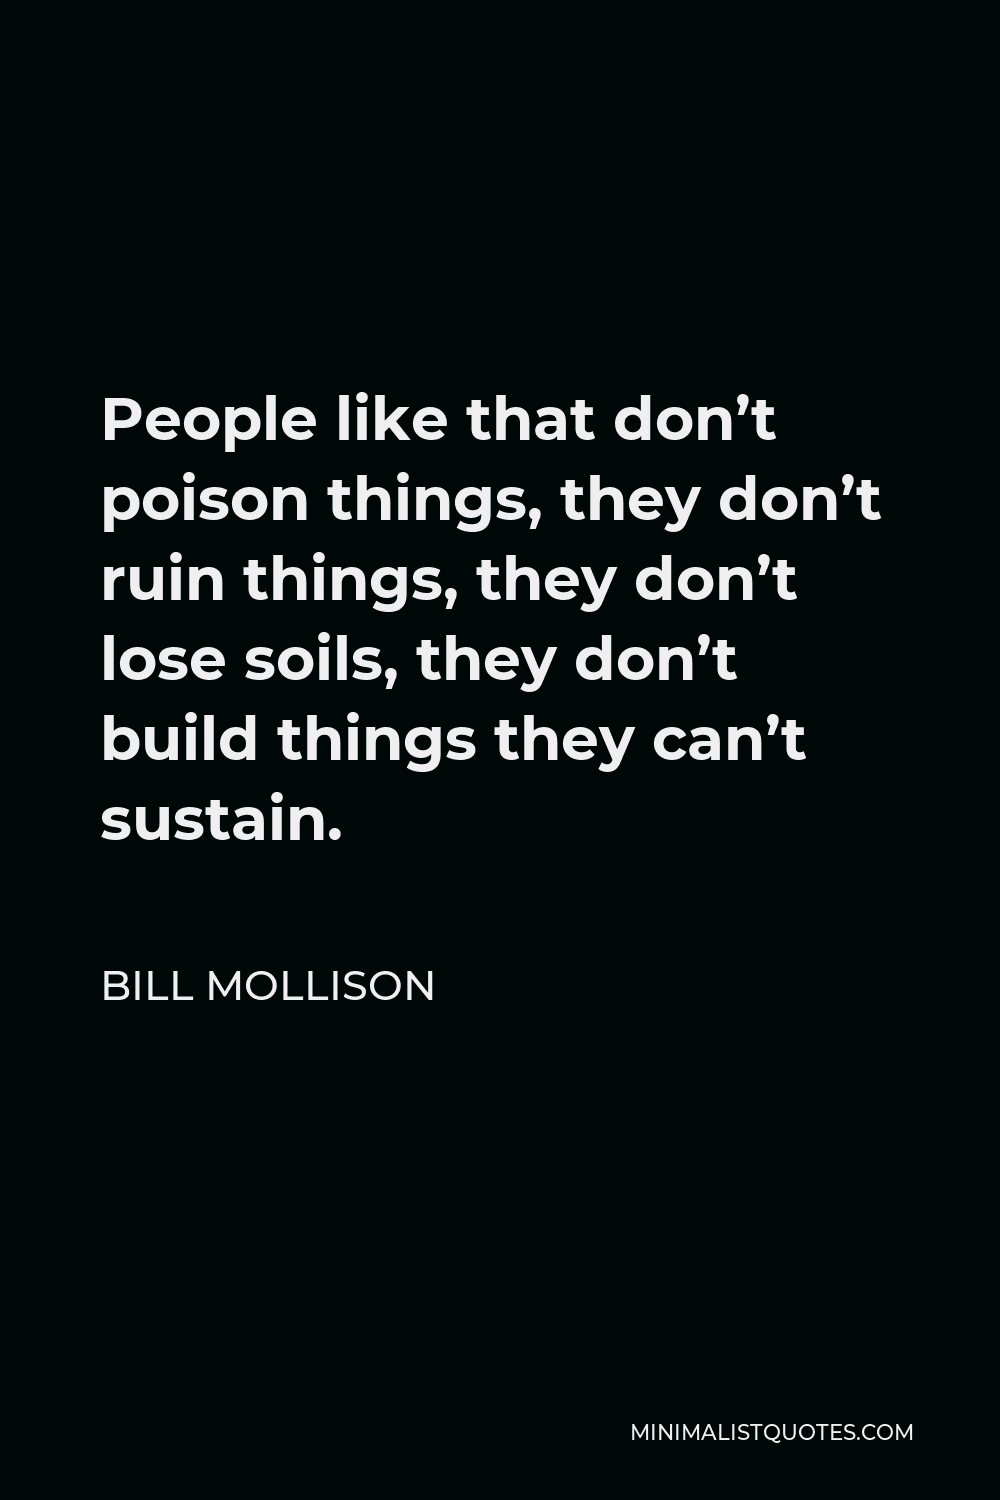 Bill Mollison Quote - People like that don’t poison things, they don’t ruin things, they don’t lose soils, they don’t build things they can’t sustain.